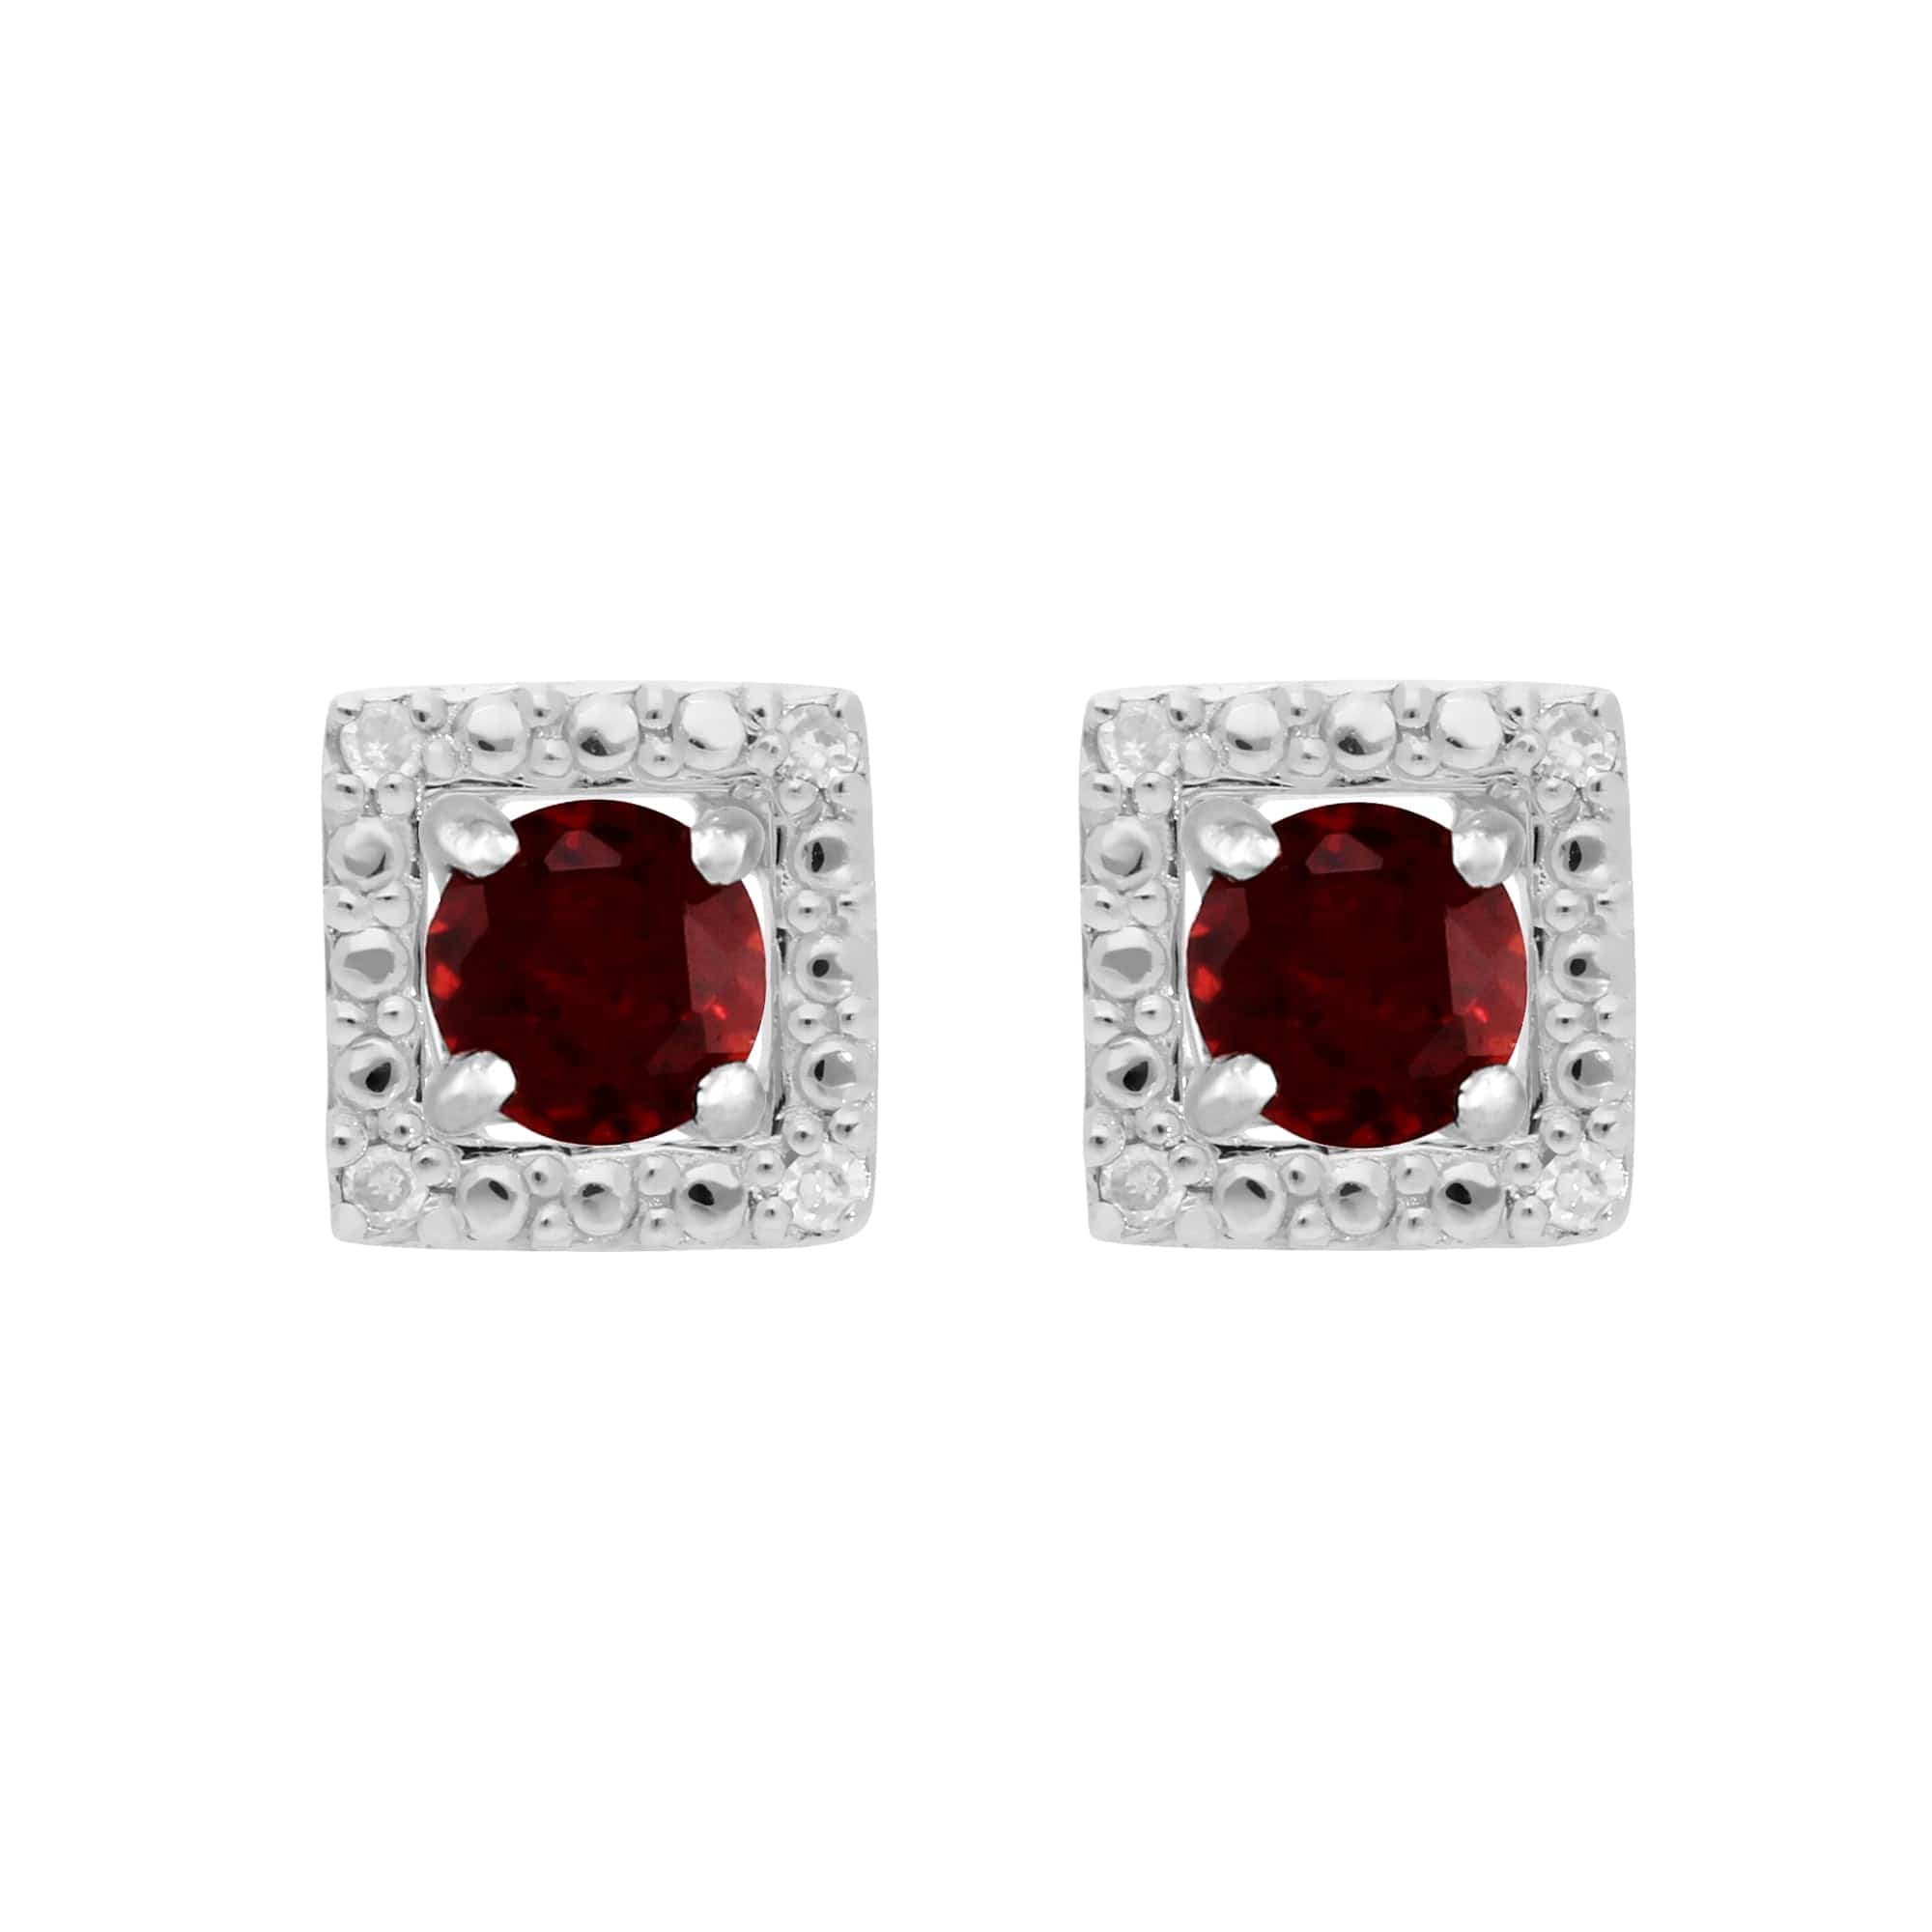 117E0031109-162E0245019 Classic Round Garnet Stud Earrings with Detachable Diamond Square Ear Jacket in 9ct White Gold 1